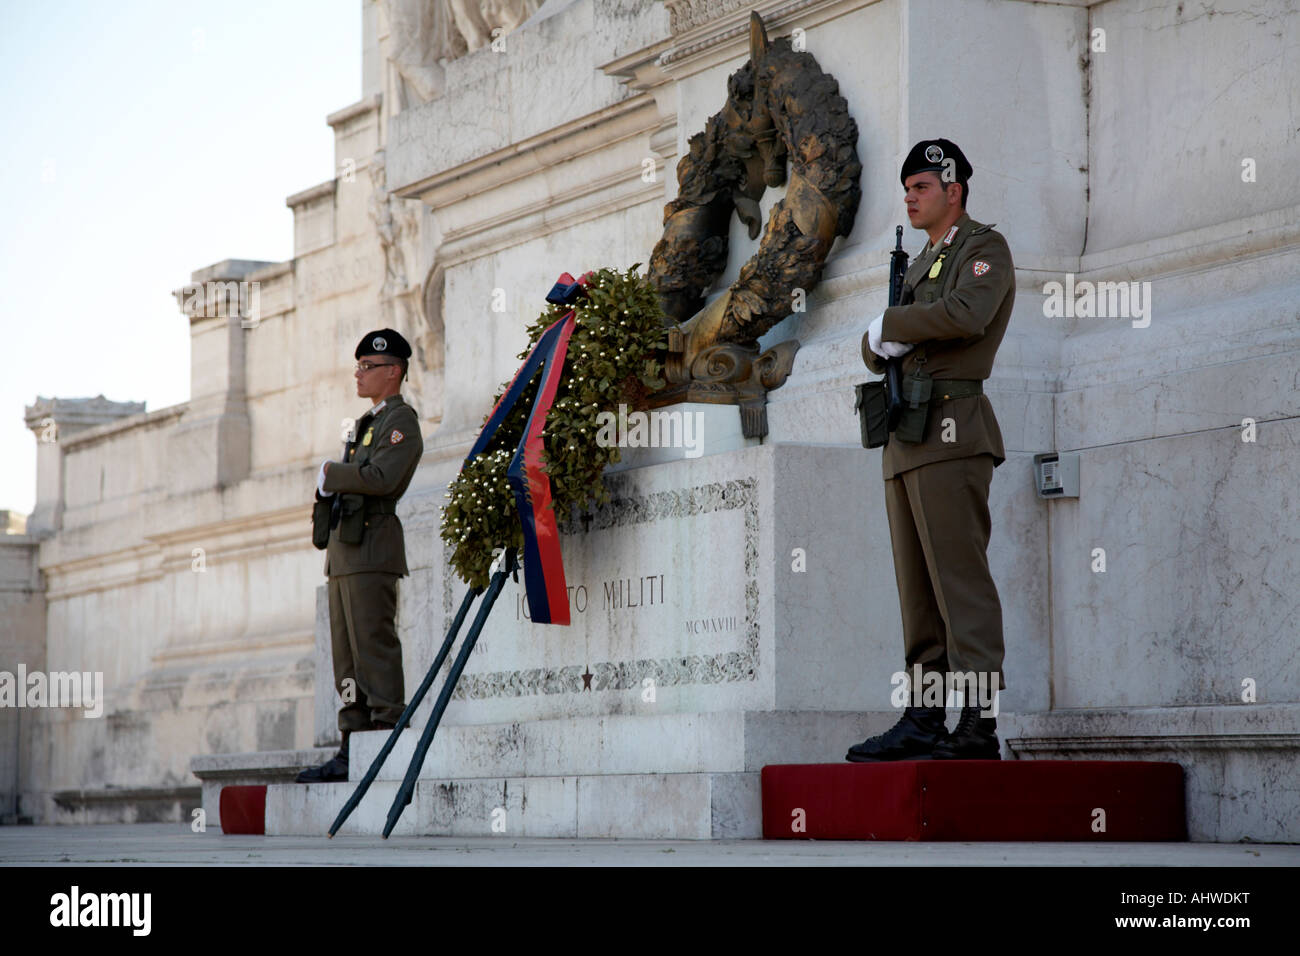 Italian army officers guard the wreaths at the Monument Vittorio Emanuele II in Rome Lazio Italy Stock Photo